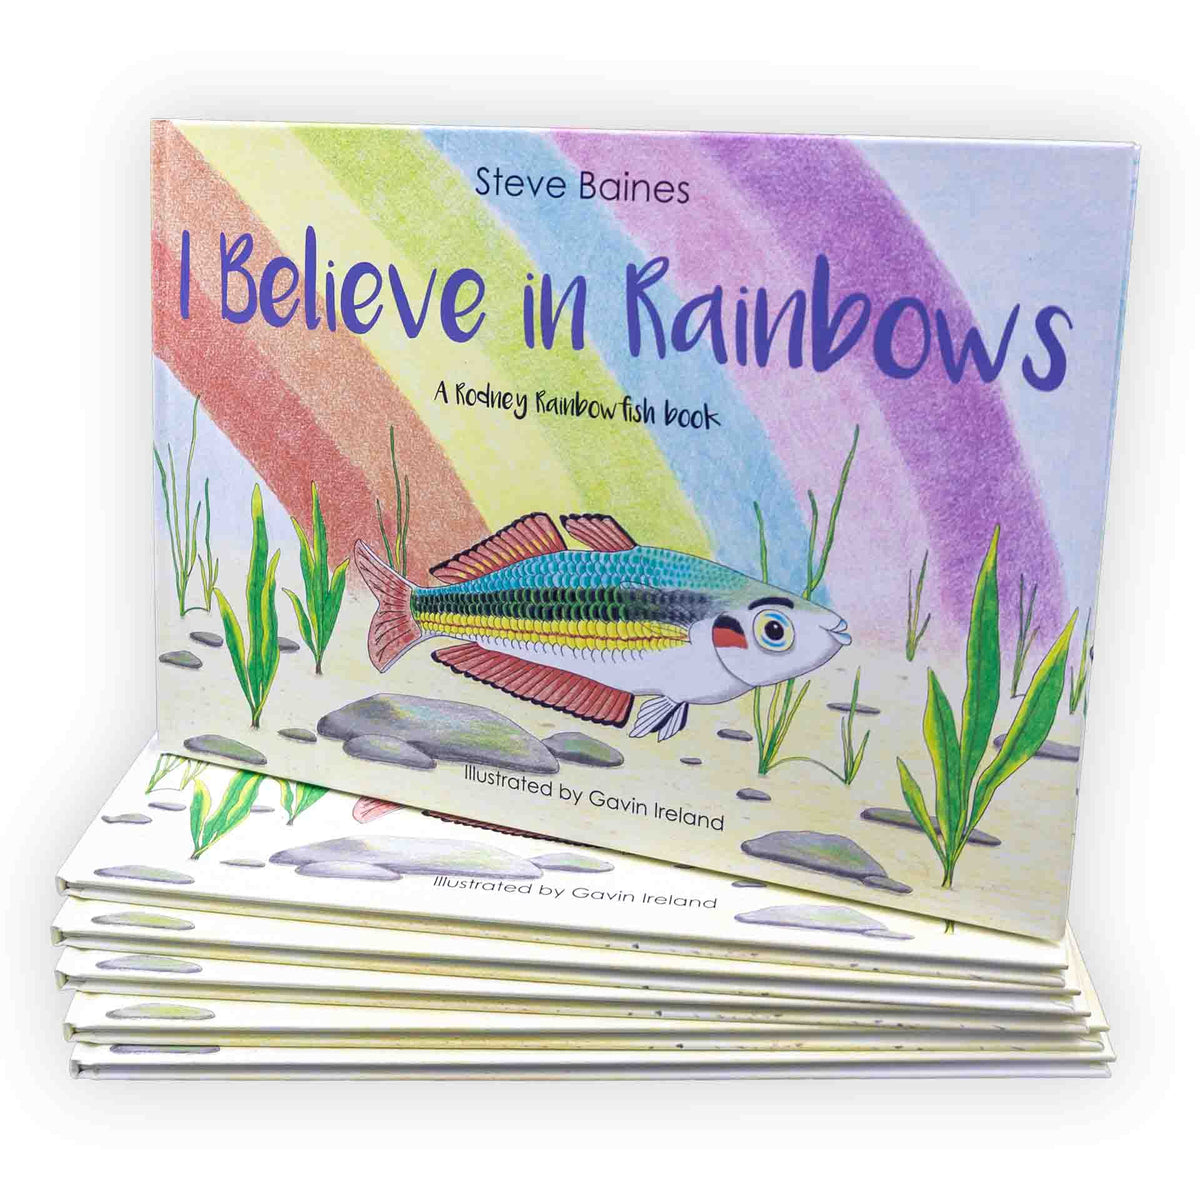 I Believe in Rainbows by Steve Baines